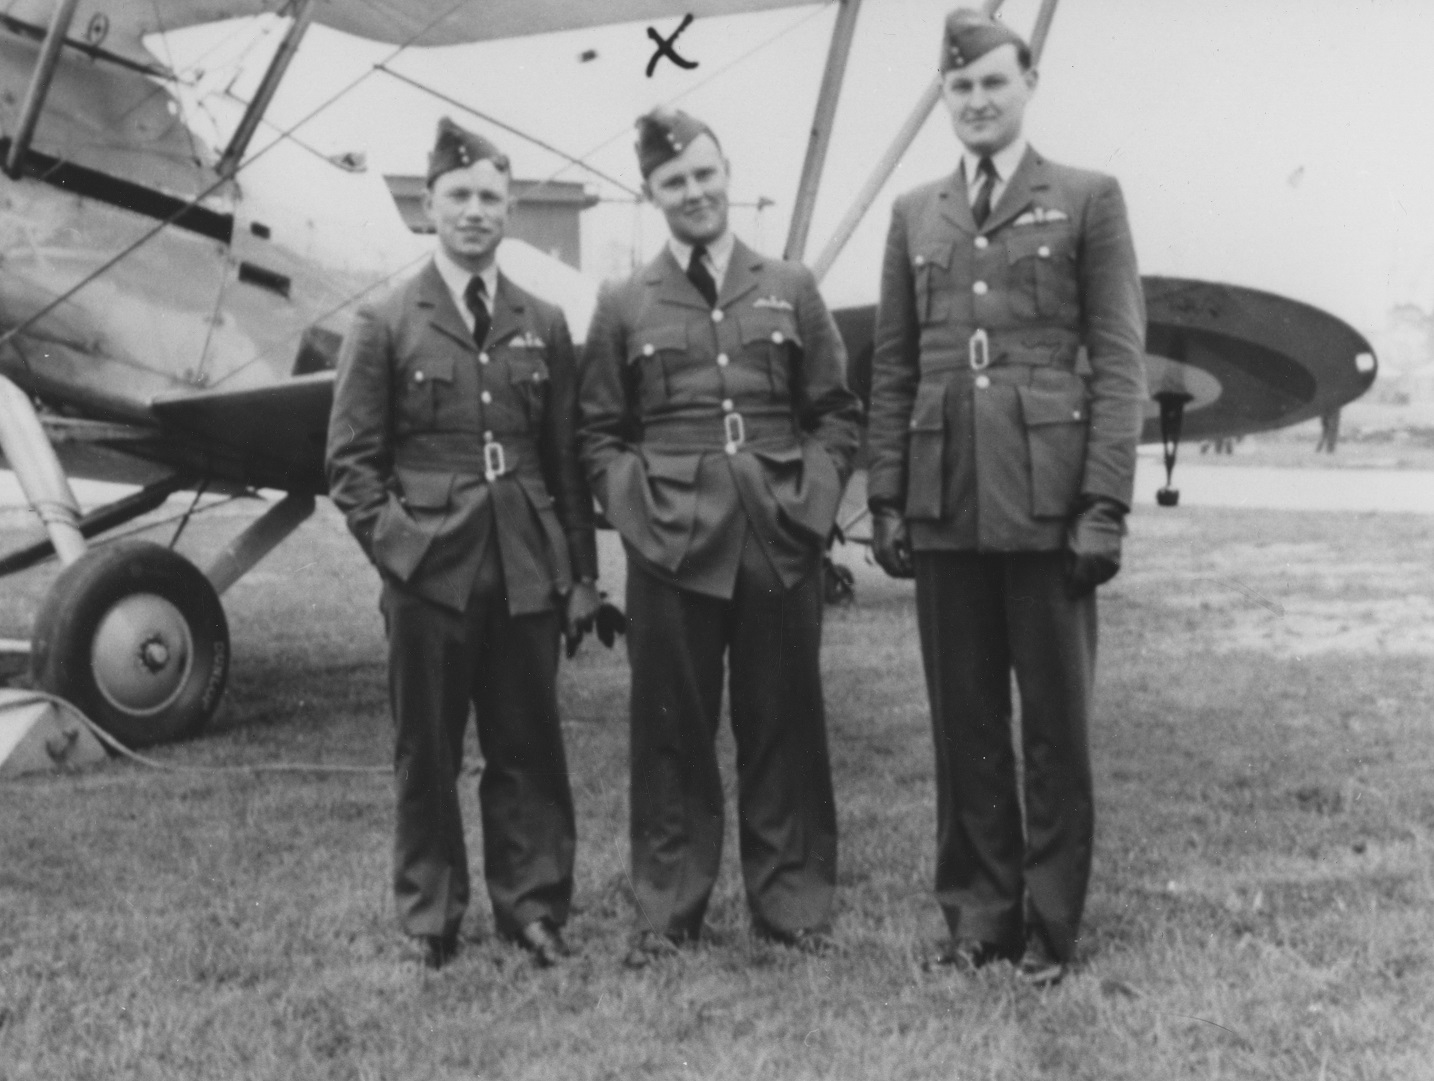 Black and white image shows World War Two RAF personnel standing by the wing of an aircraft.